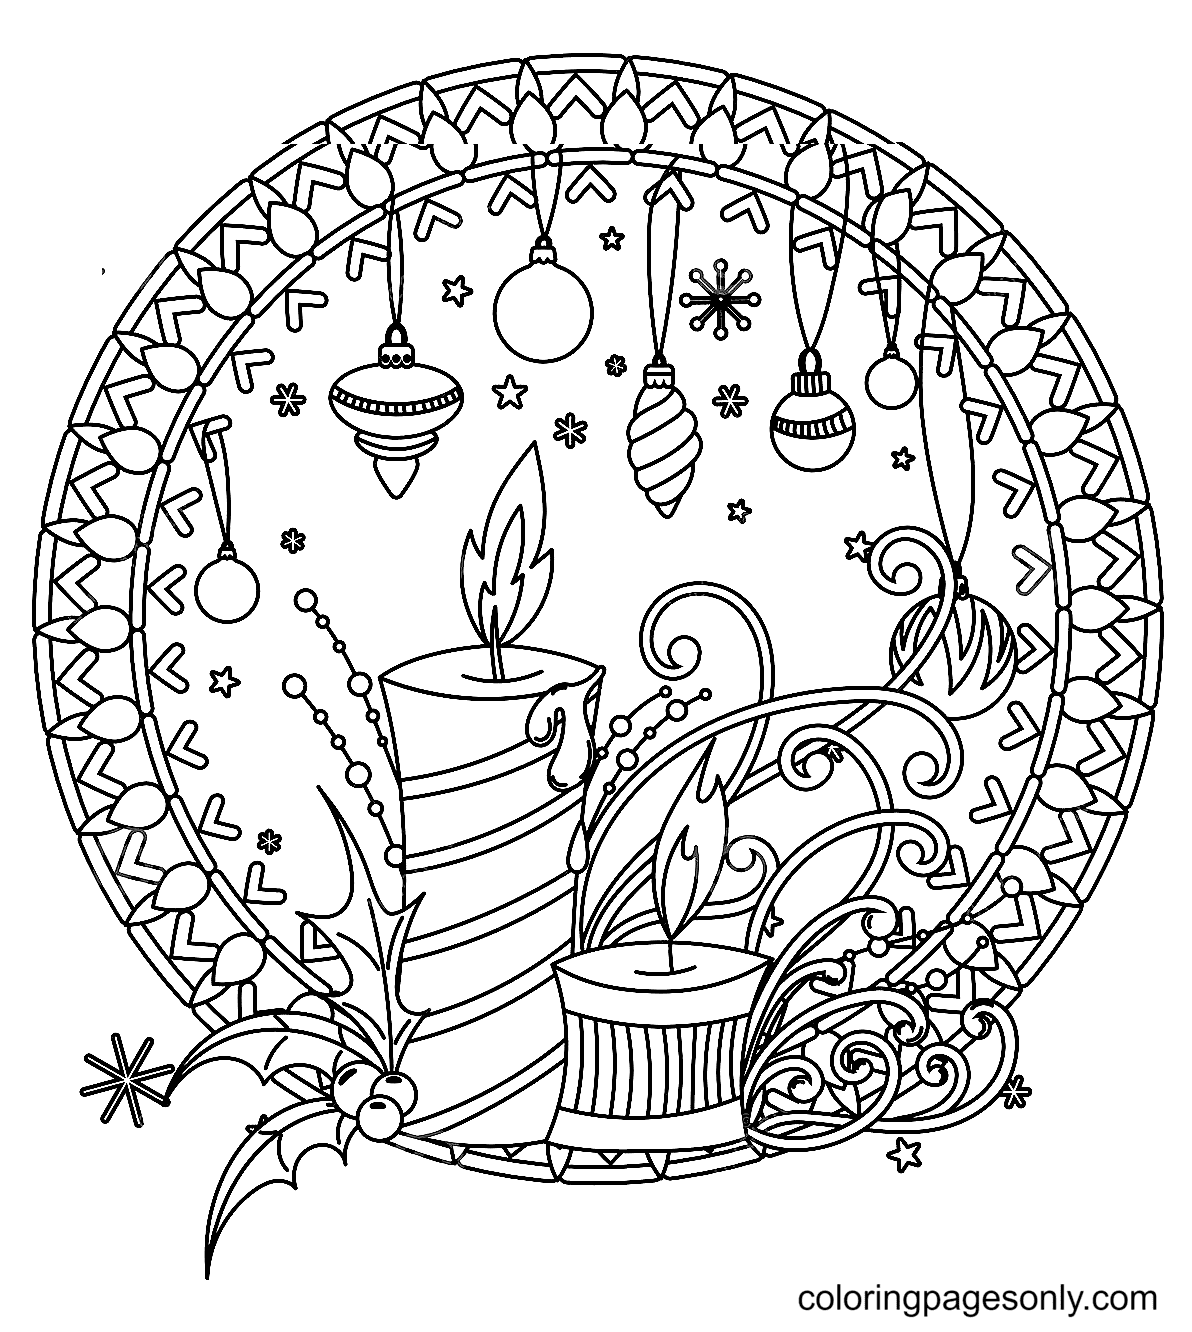 Christmas Mandala Decorations and Candles Coloring Page - Free ...